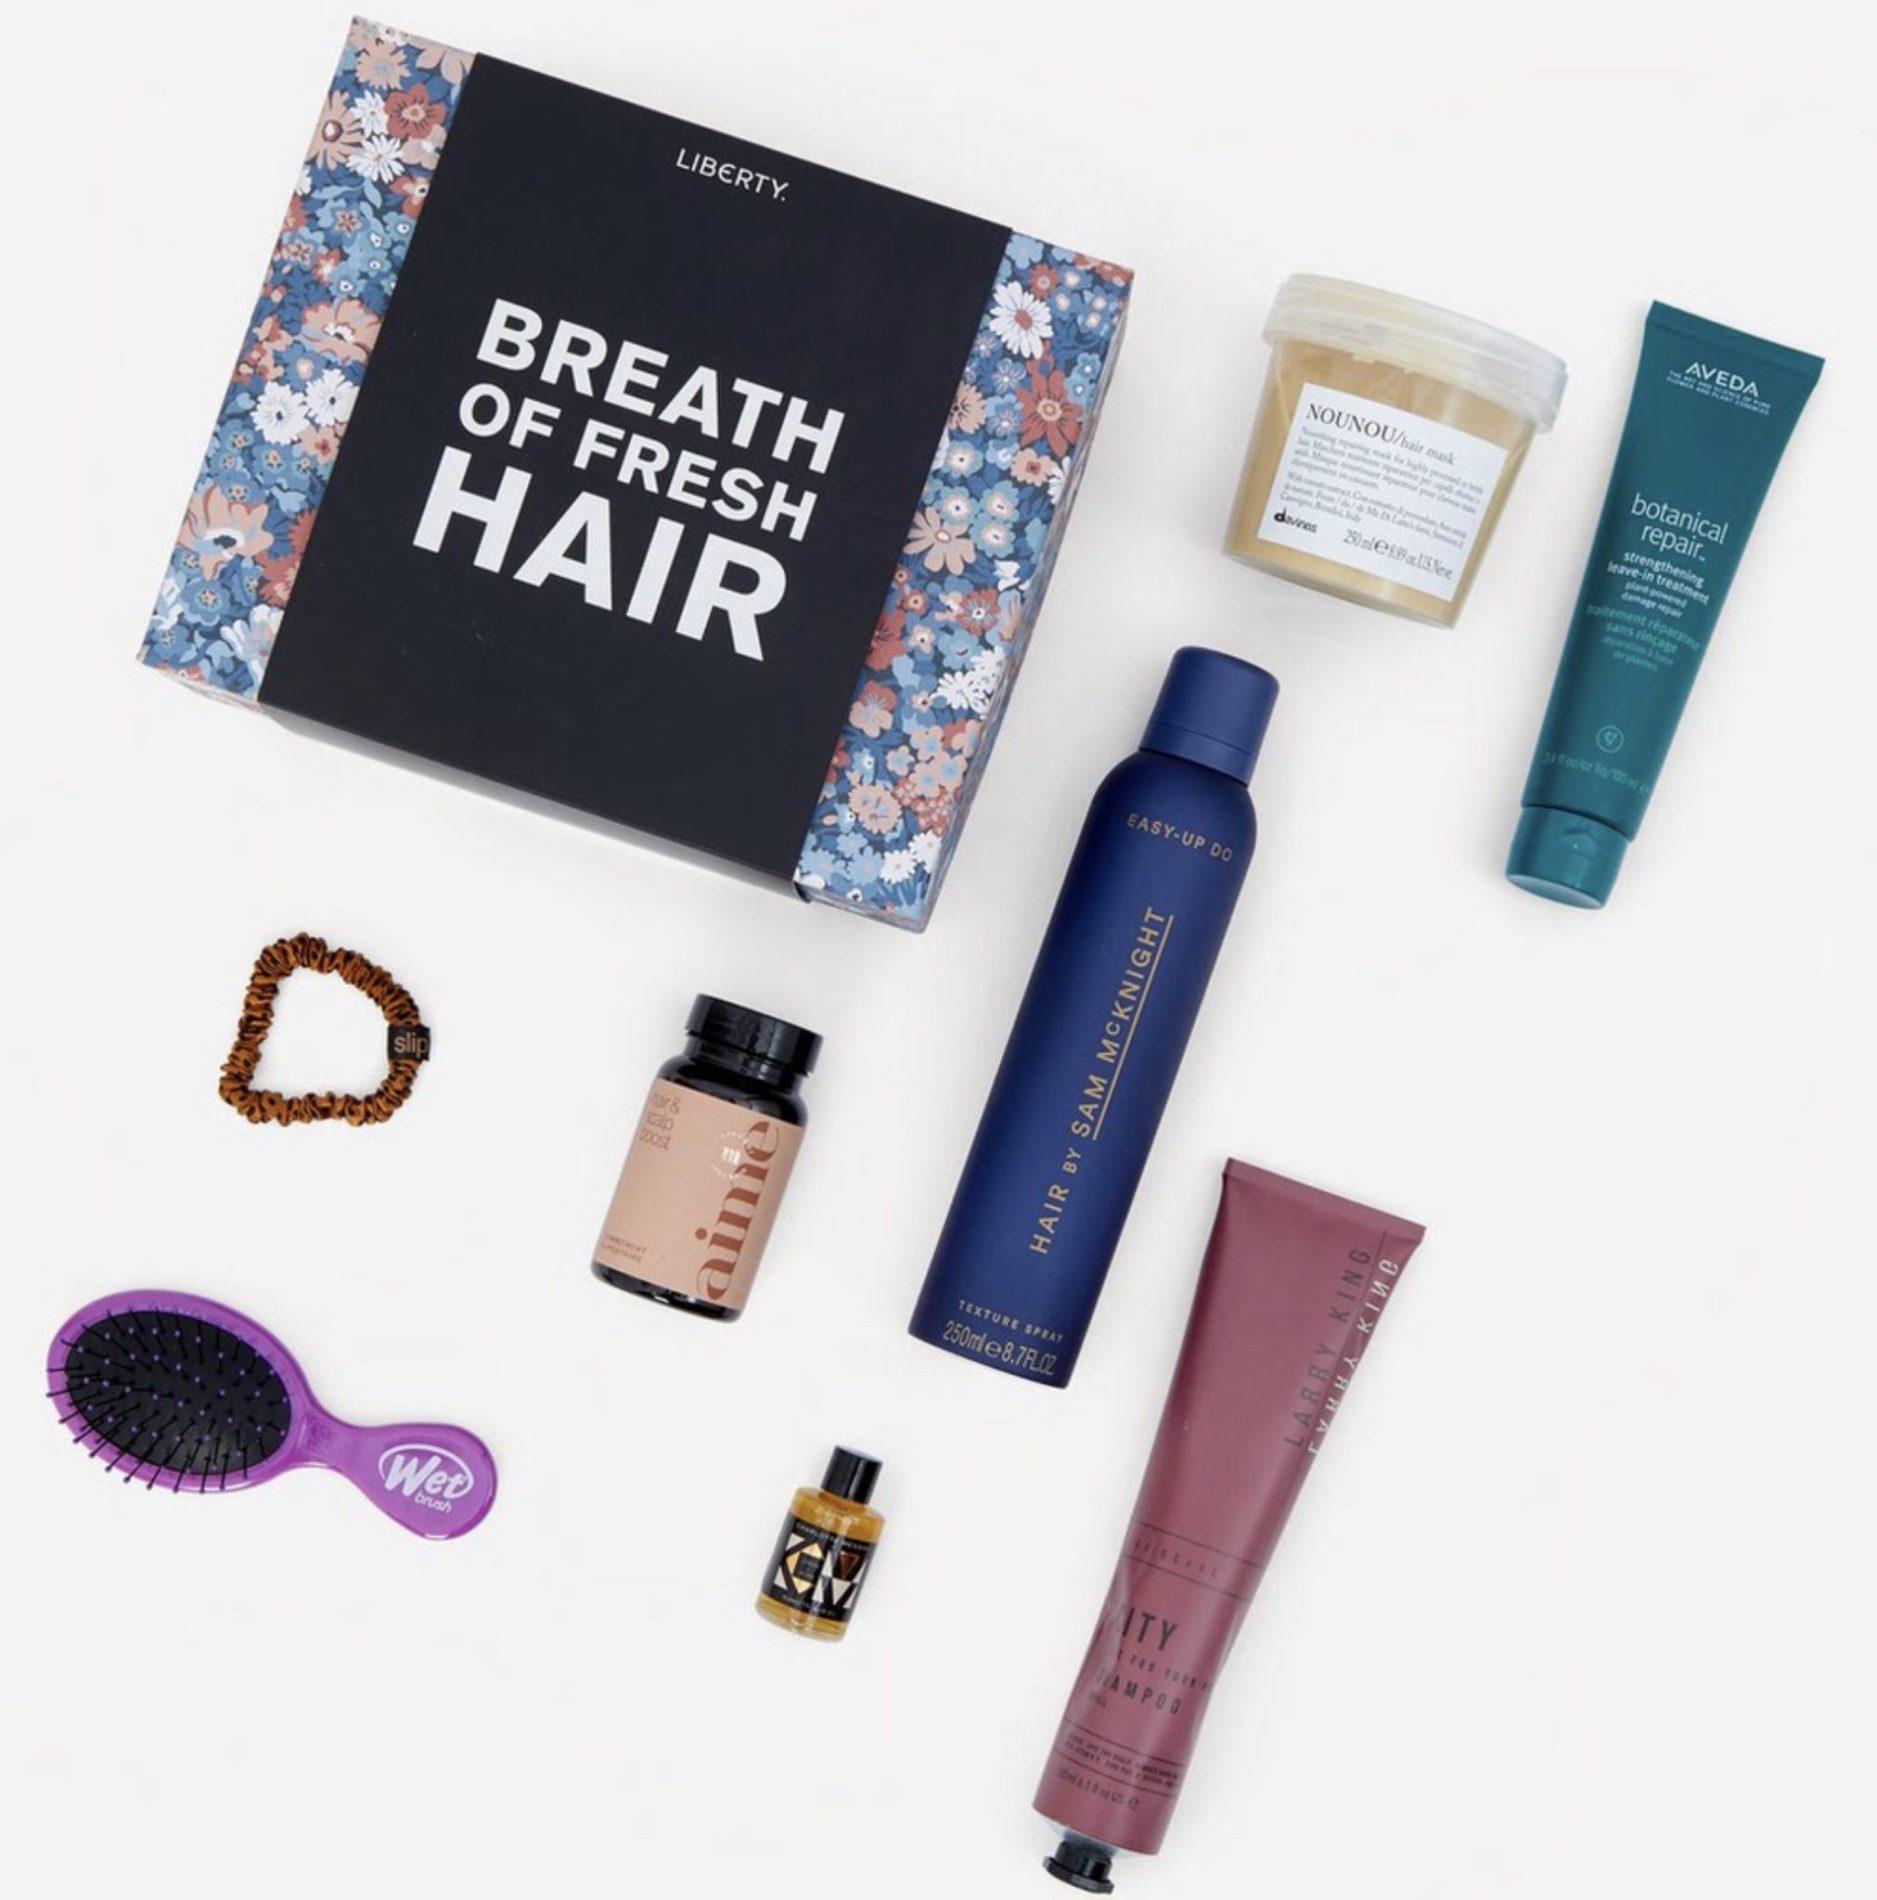 Read more about the article Liberty London “Breath of Fresh Hair” Beauty Kit – Now Available!